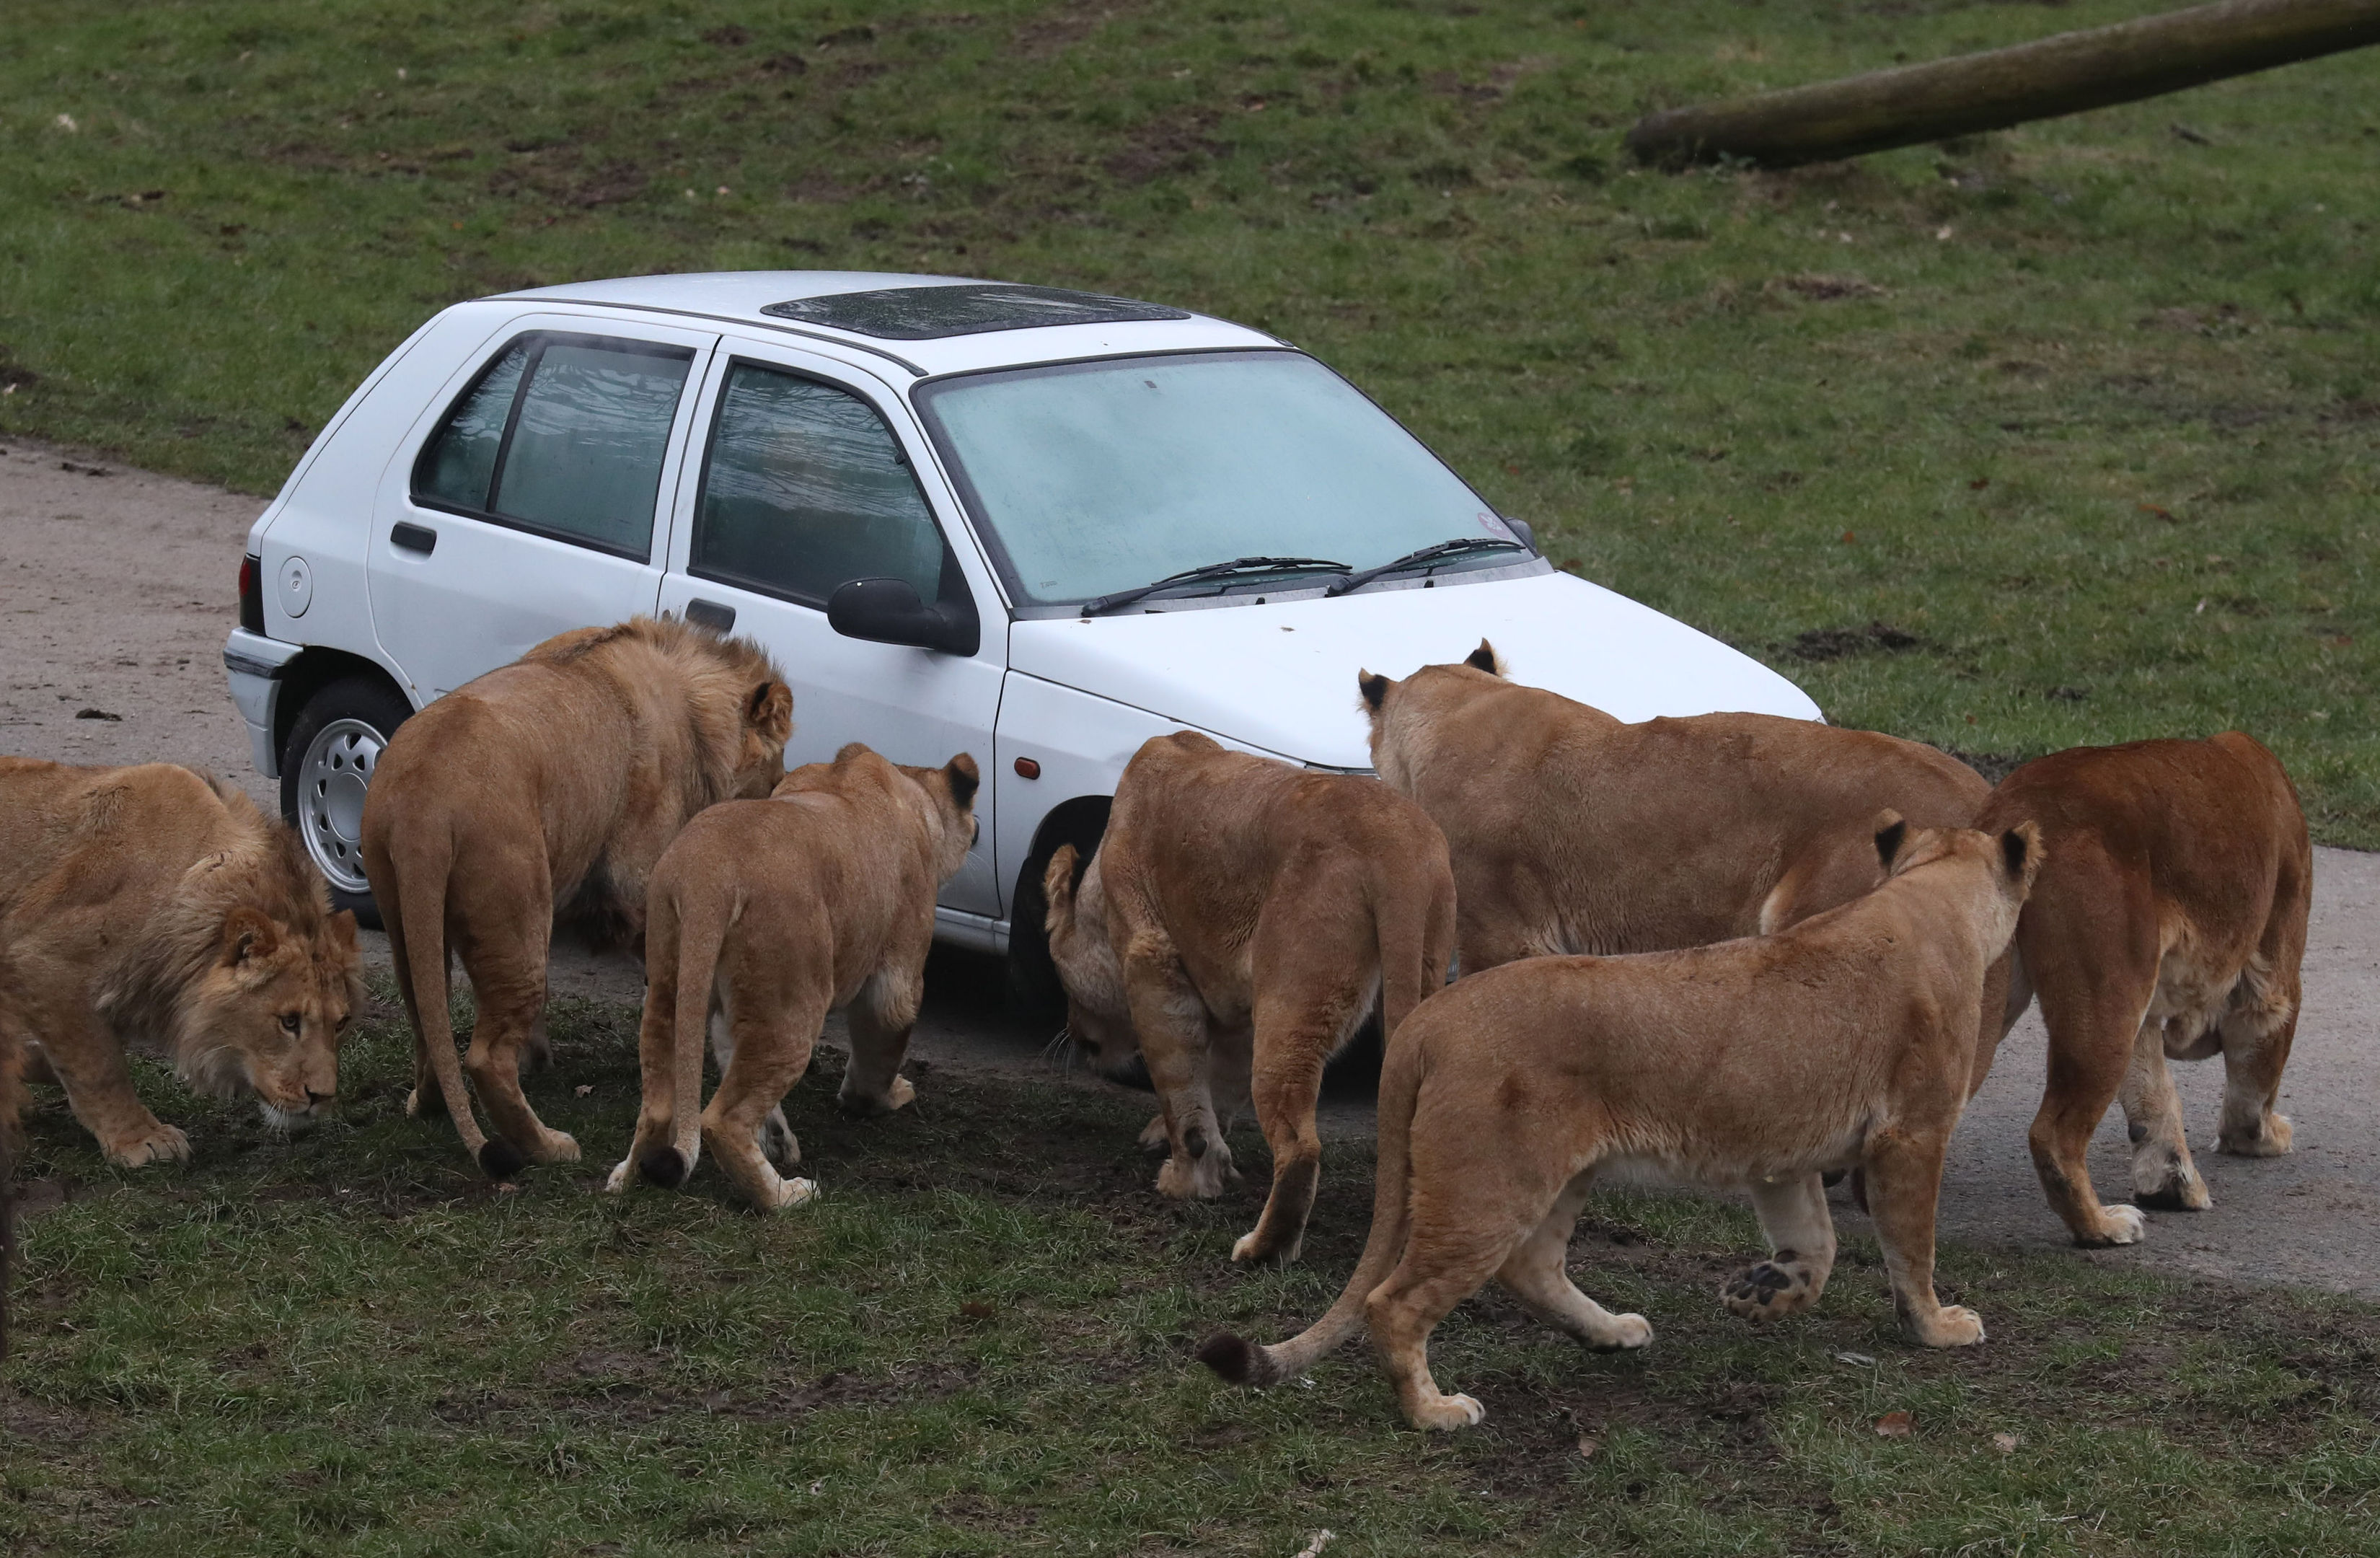 In pics: Pride of lions put through fire safety test at Blair Drummond Safari Park - Sunday Post